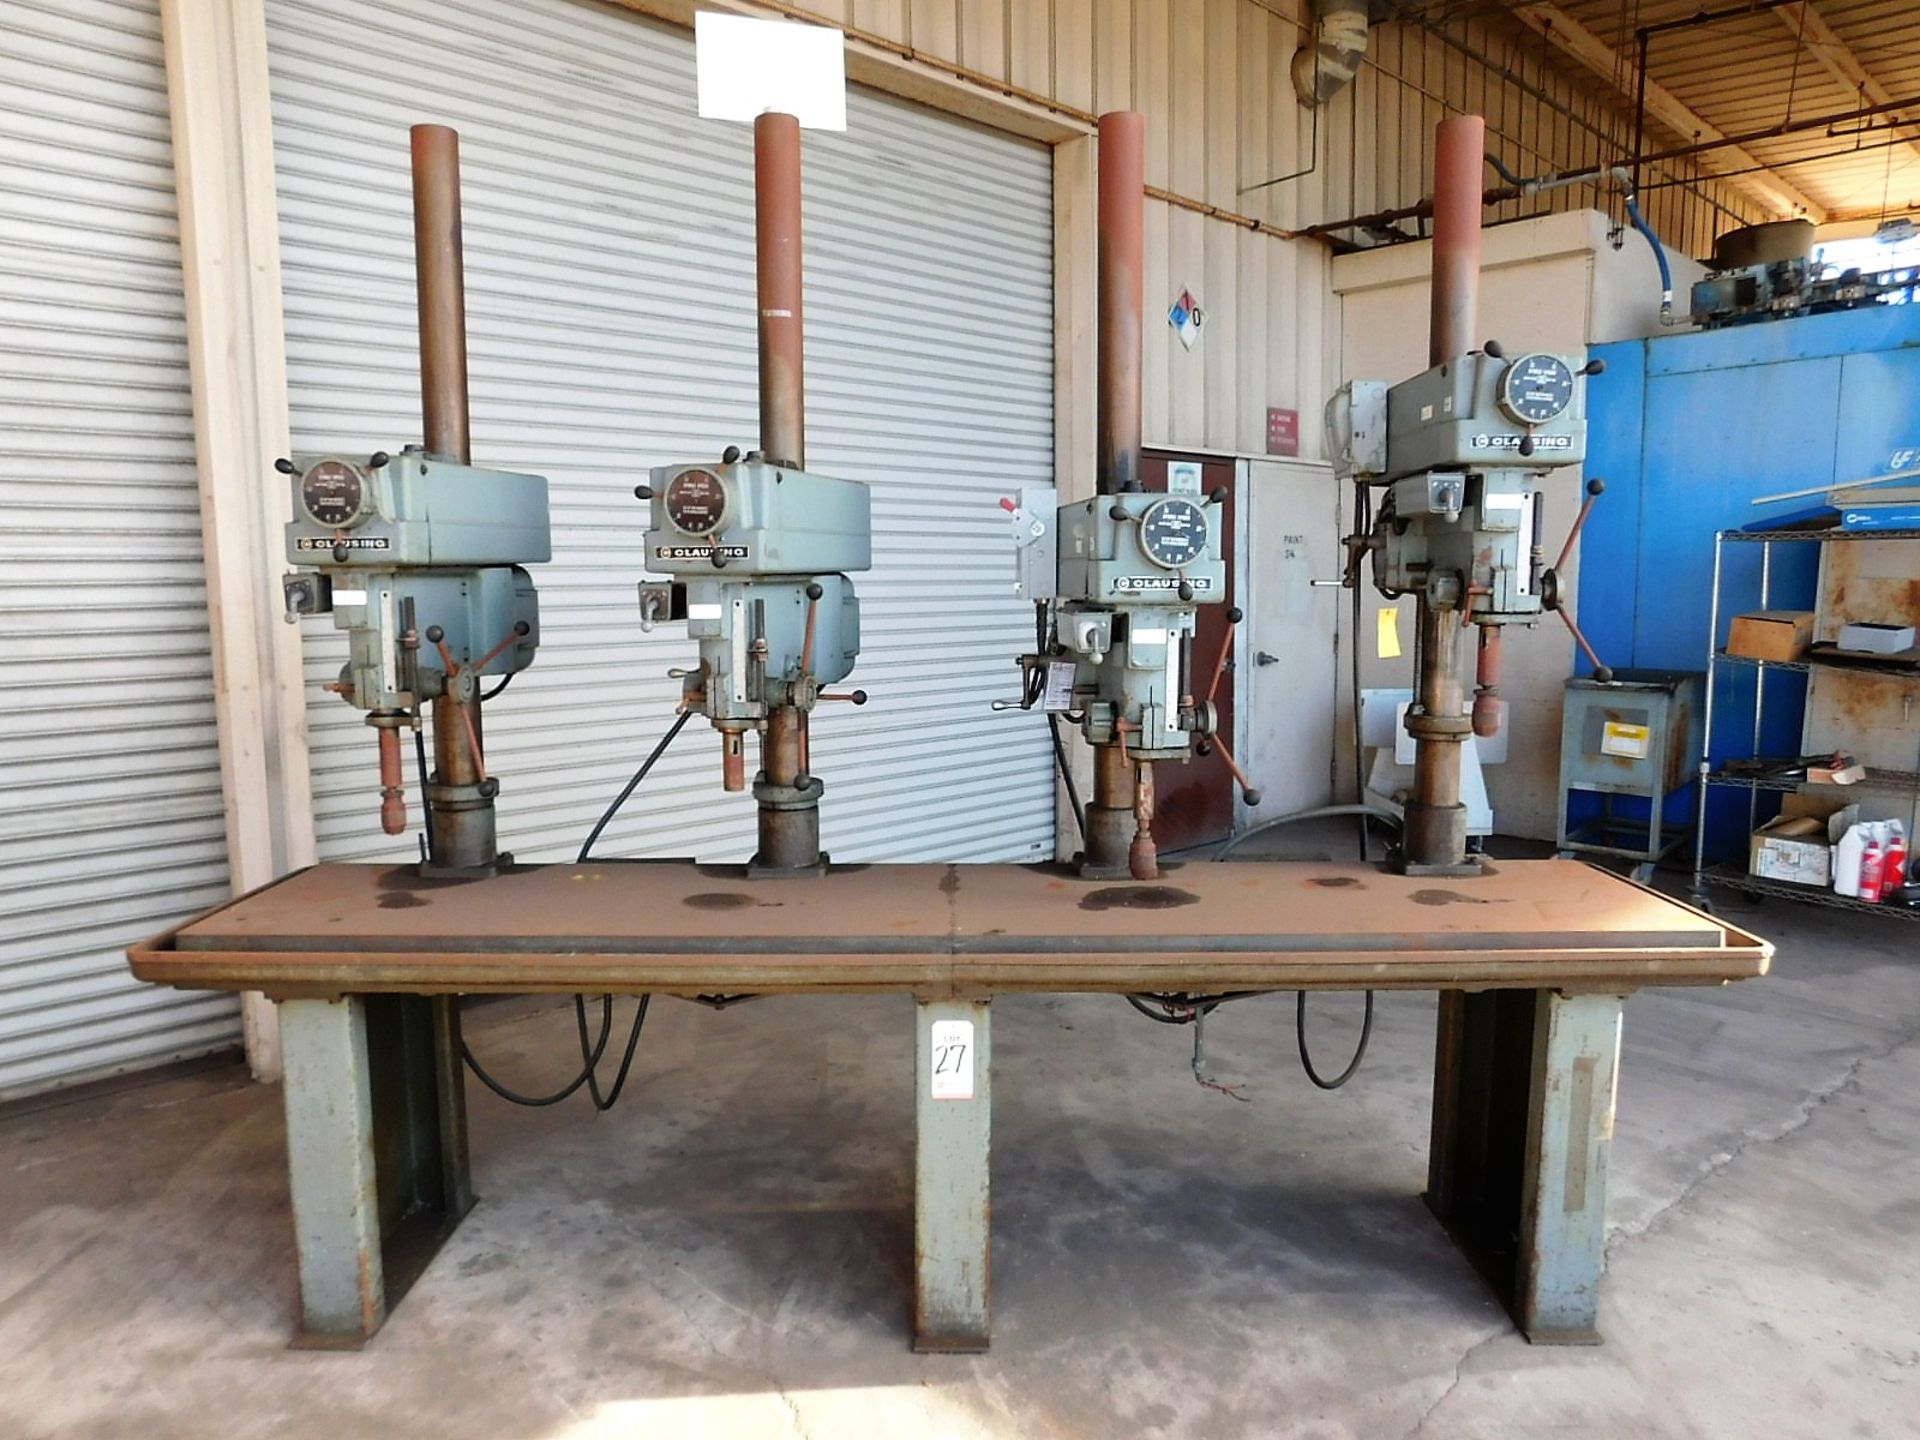 CLAUSING 4-HEAD DRILL PRESS BENCH, W/ (4) MODEL 2286 20" VARIABLE SPEED DRILL PRESSES, WORKTOP